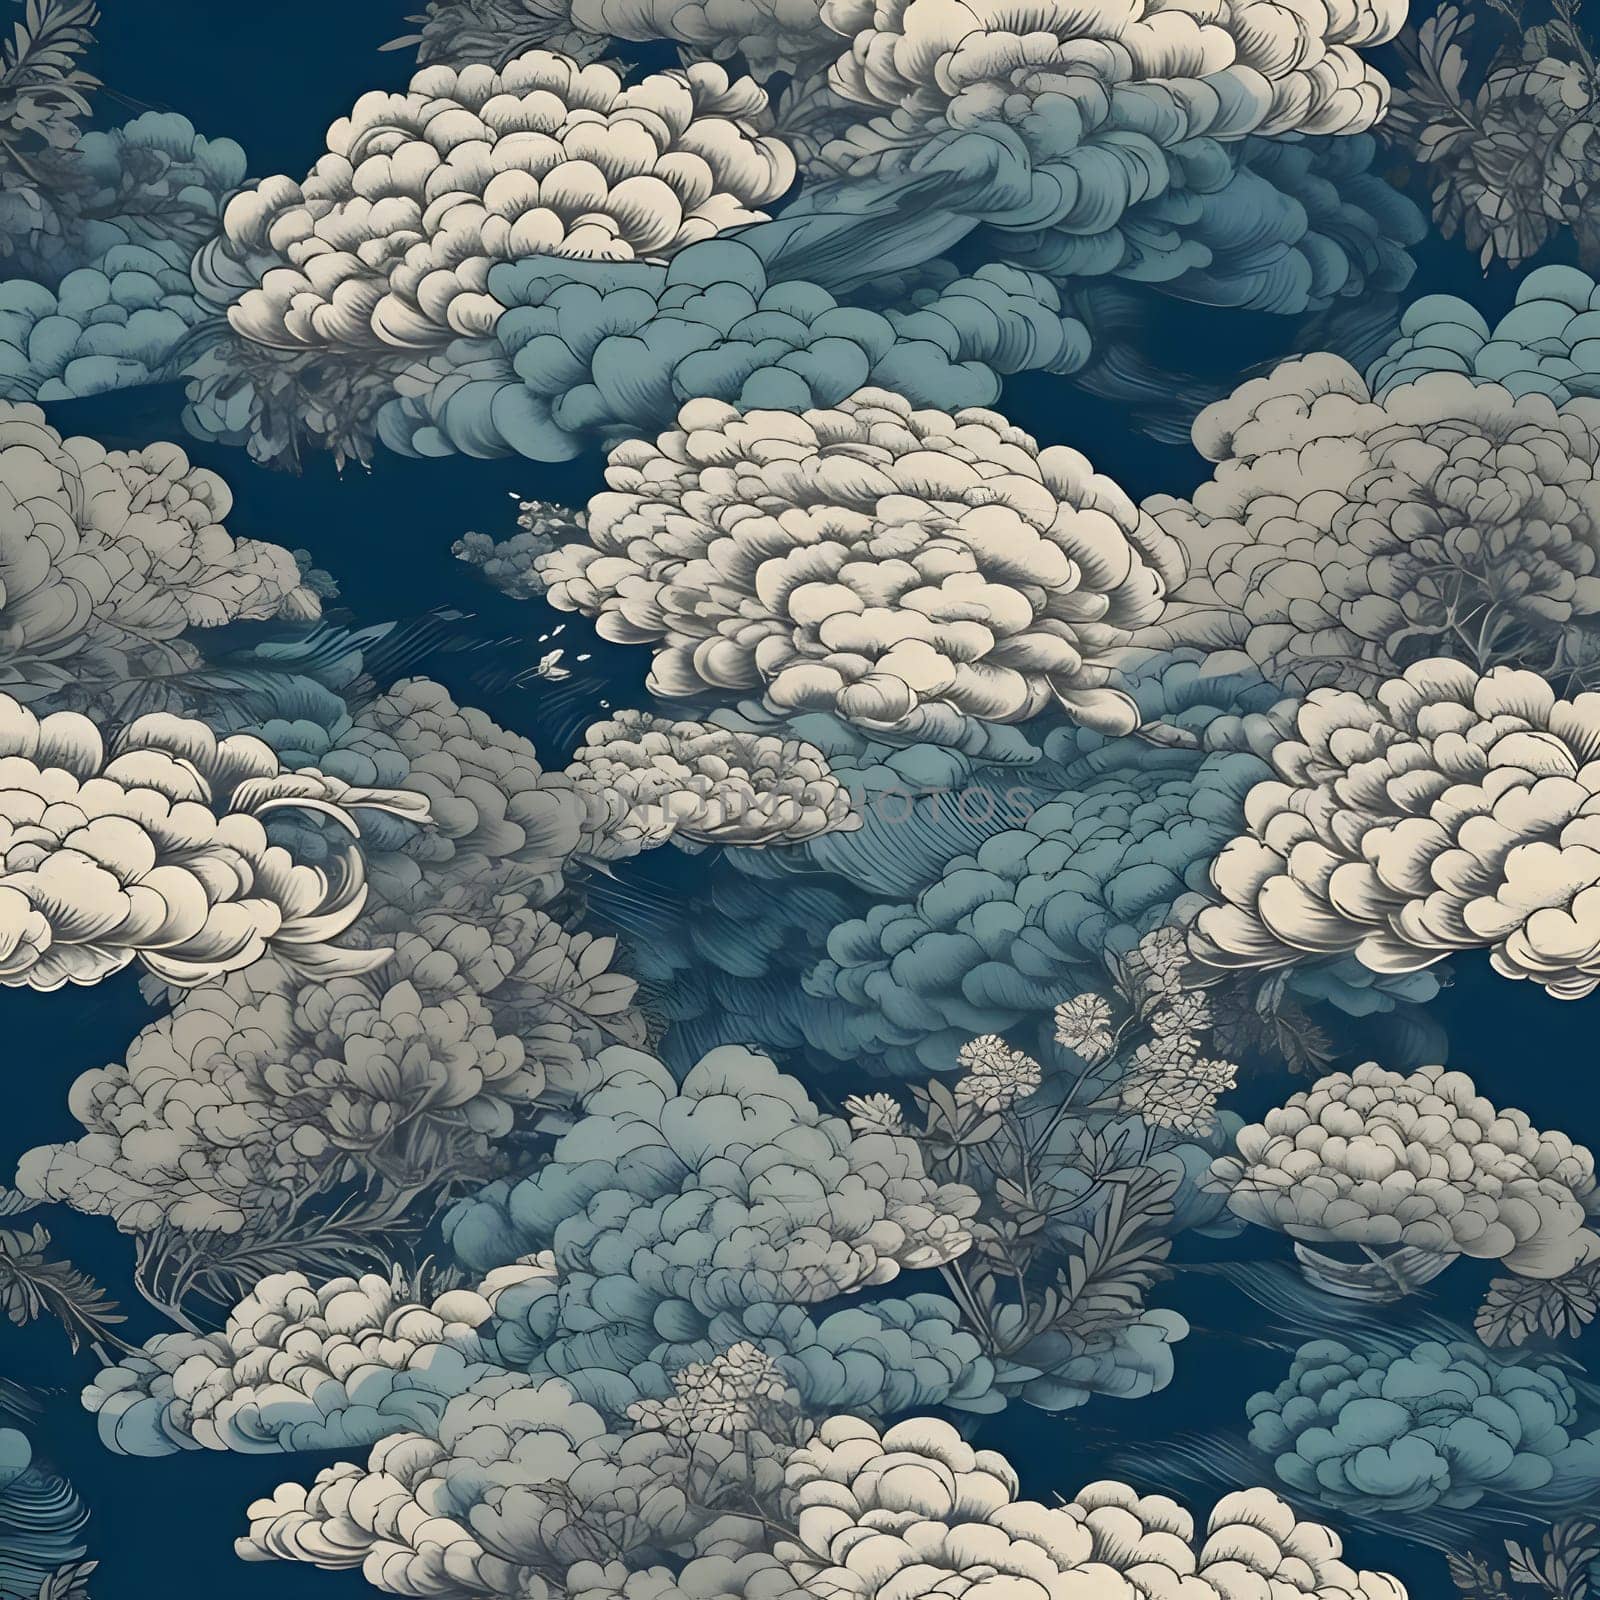 Patterns and banners backgrounds: Seamless pattern with clouds in the sky. Vector illustration.